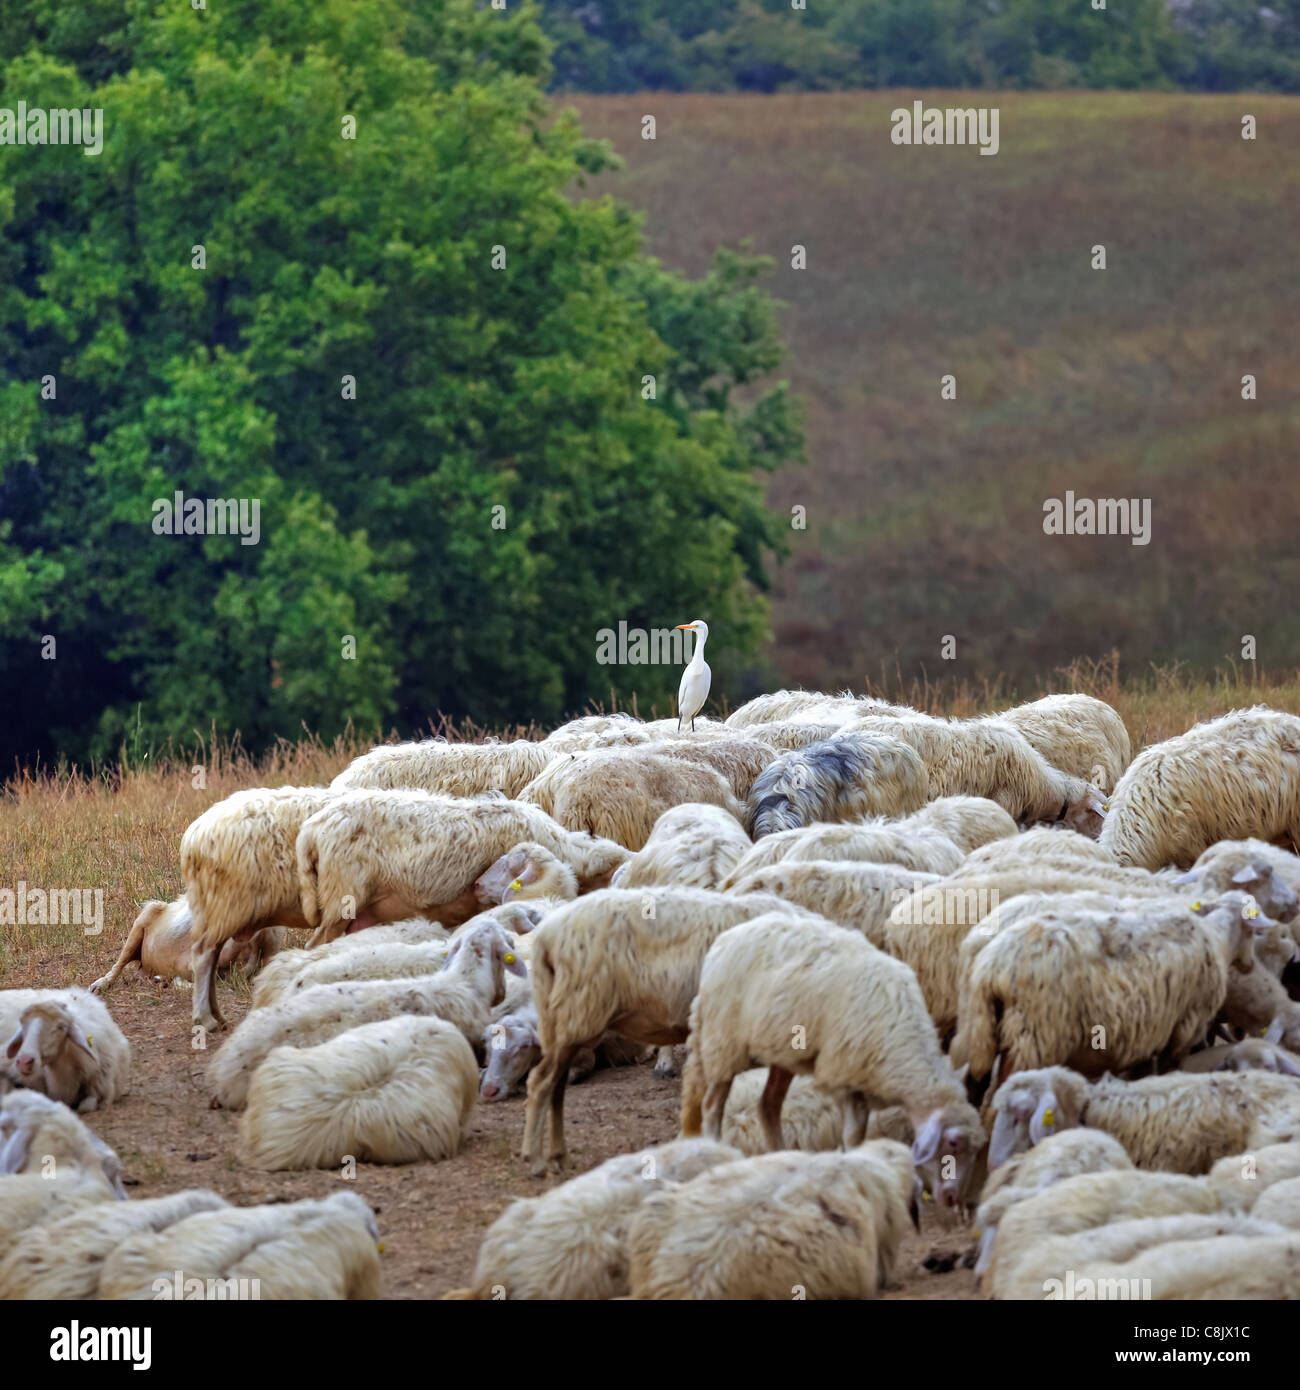 a flock of sheep in the picturesque countryside of Tuscany Stock Photo